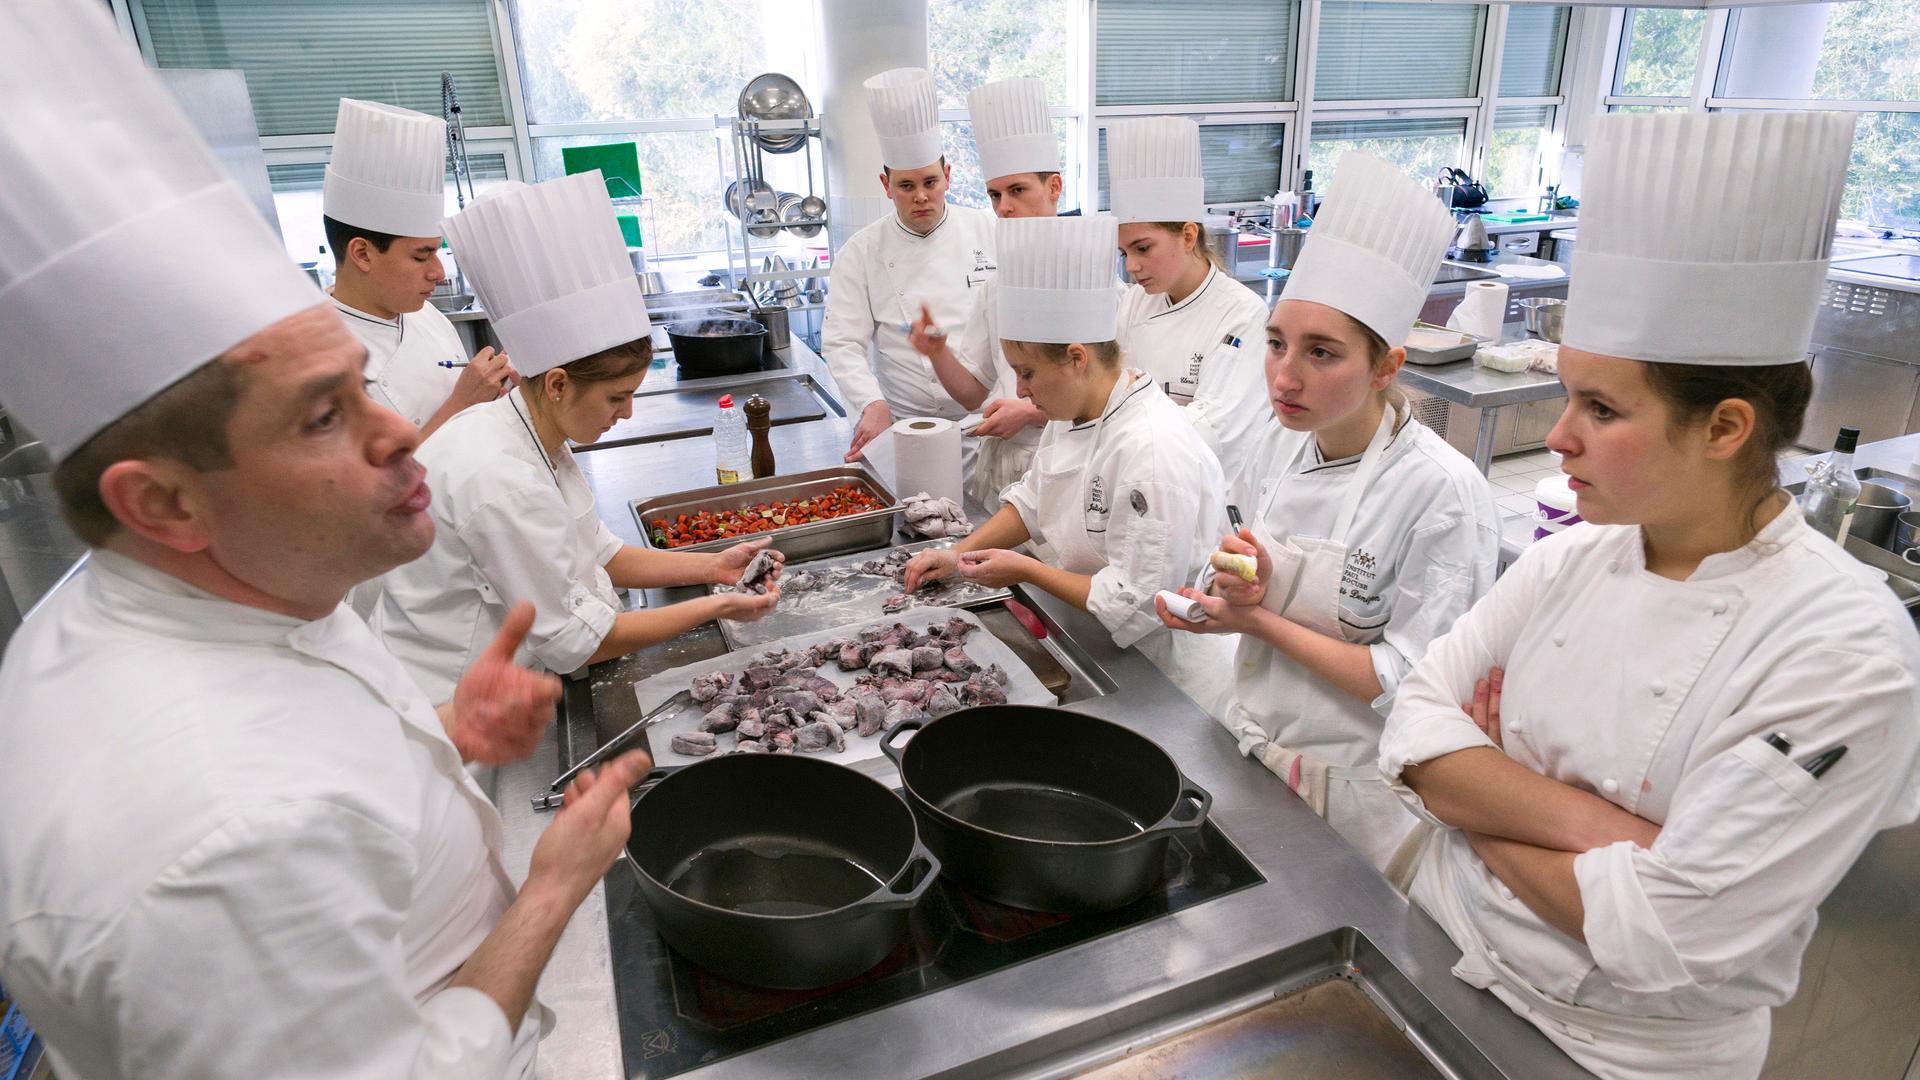 Students prepare food during a class by French chef Eric Cros (left) at the Institut Paul Bocuse.